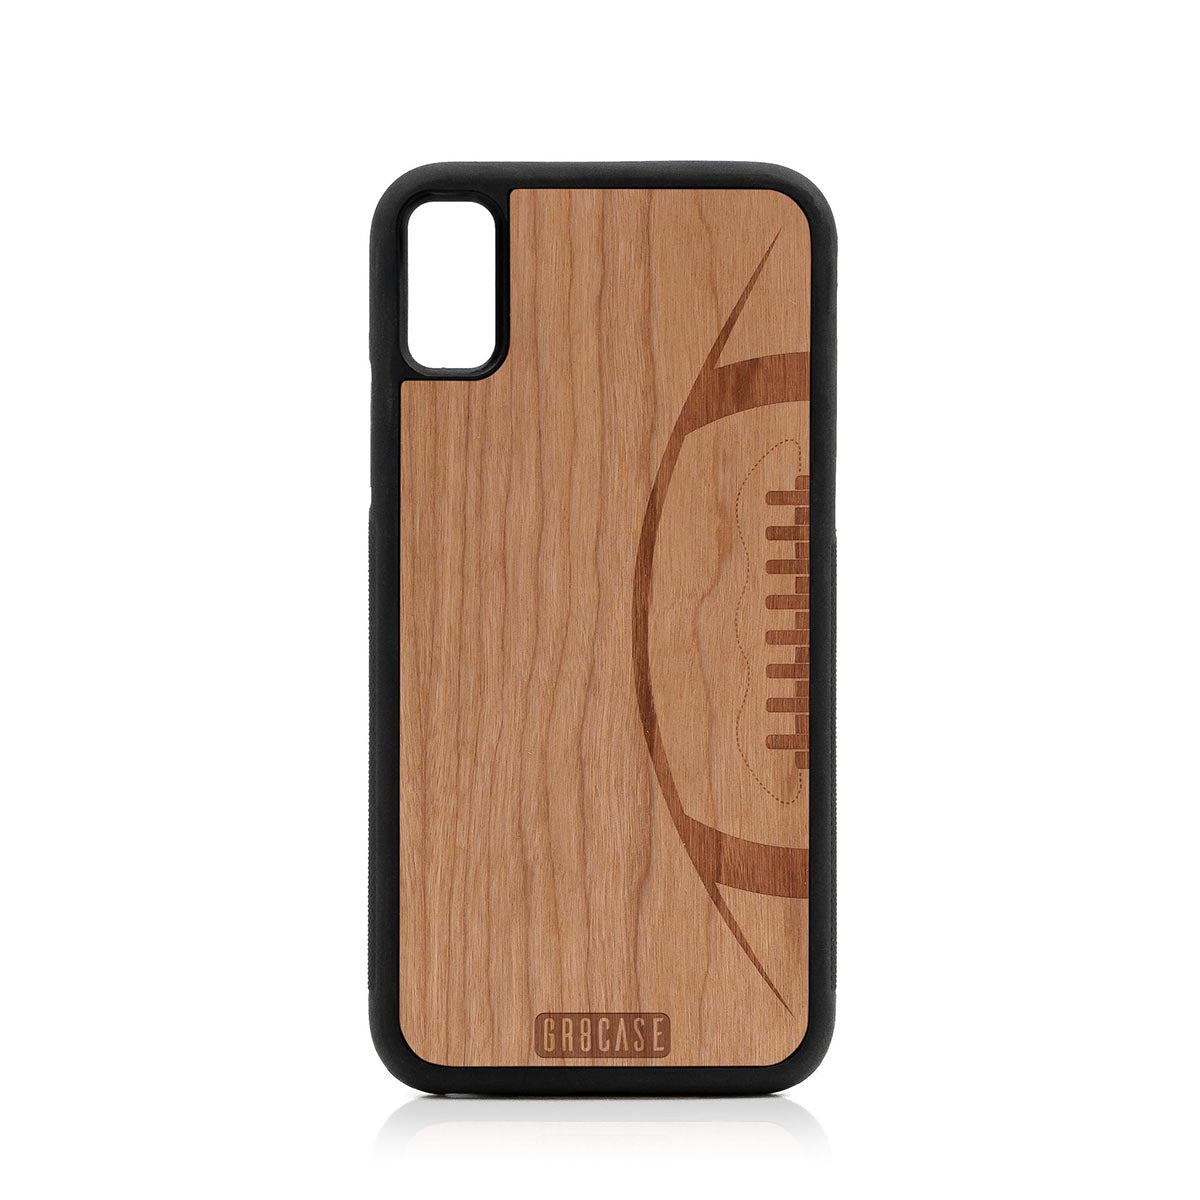 Football Design Wood Case For iPhone XS Max by GR8CASE